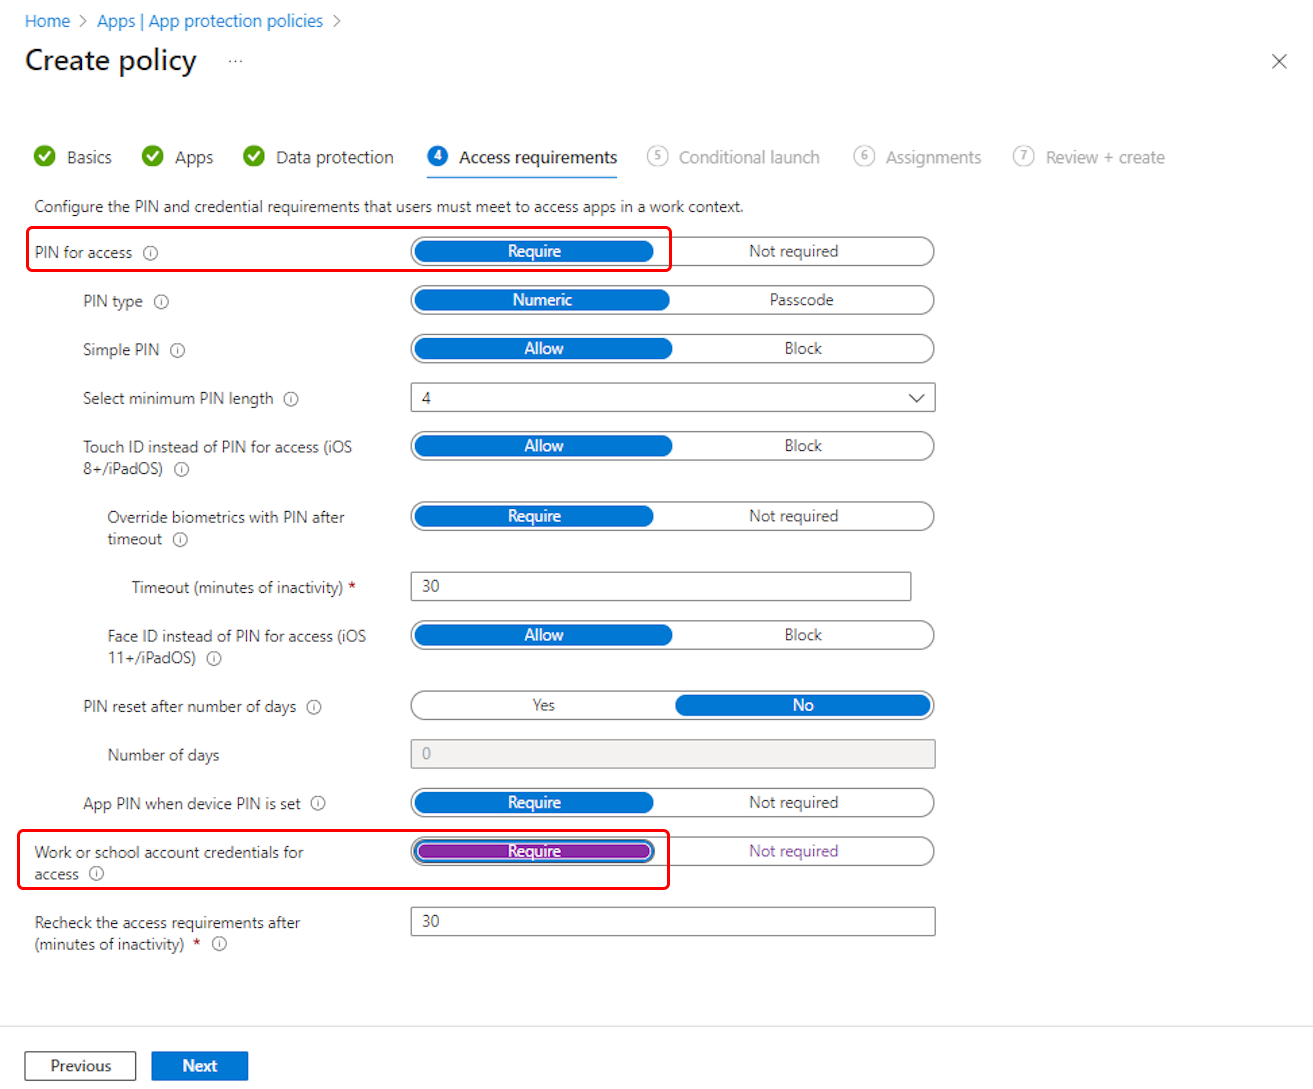 Select the Outlook app protection policy access actions.